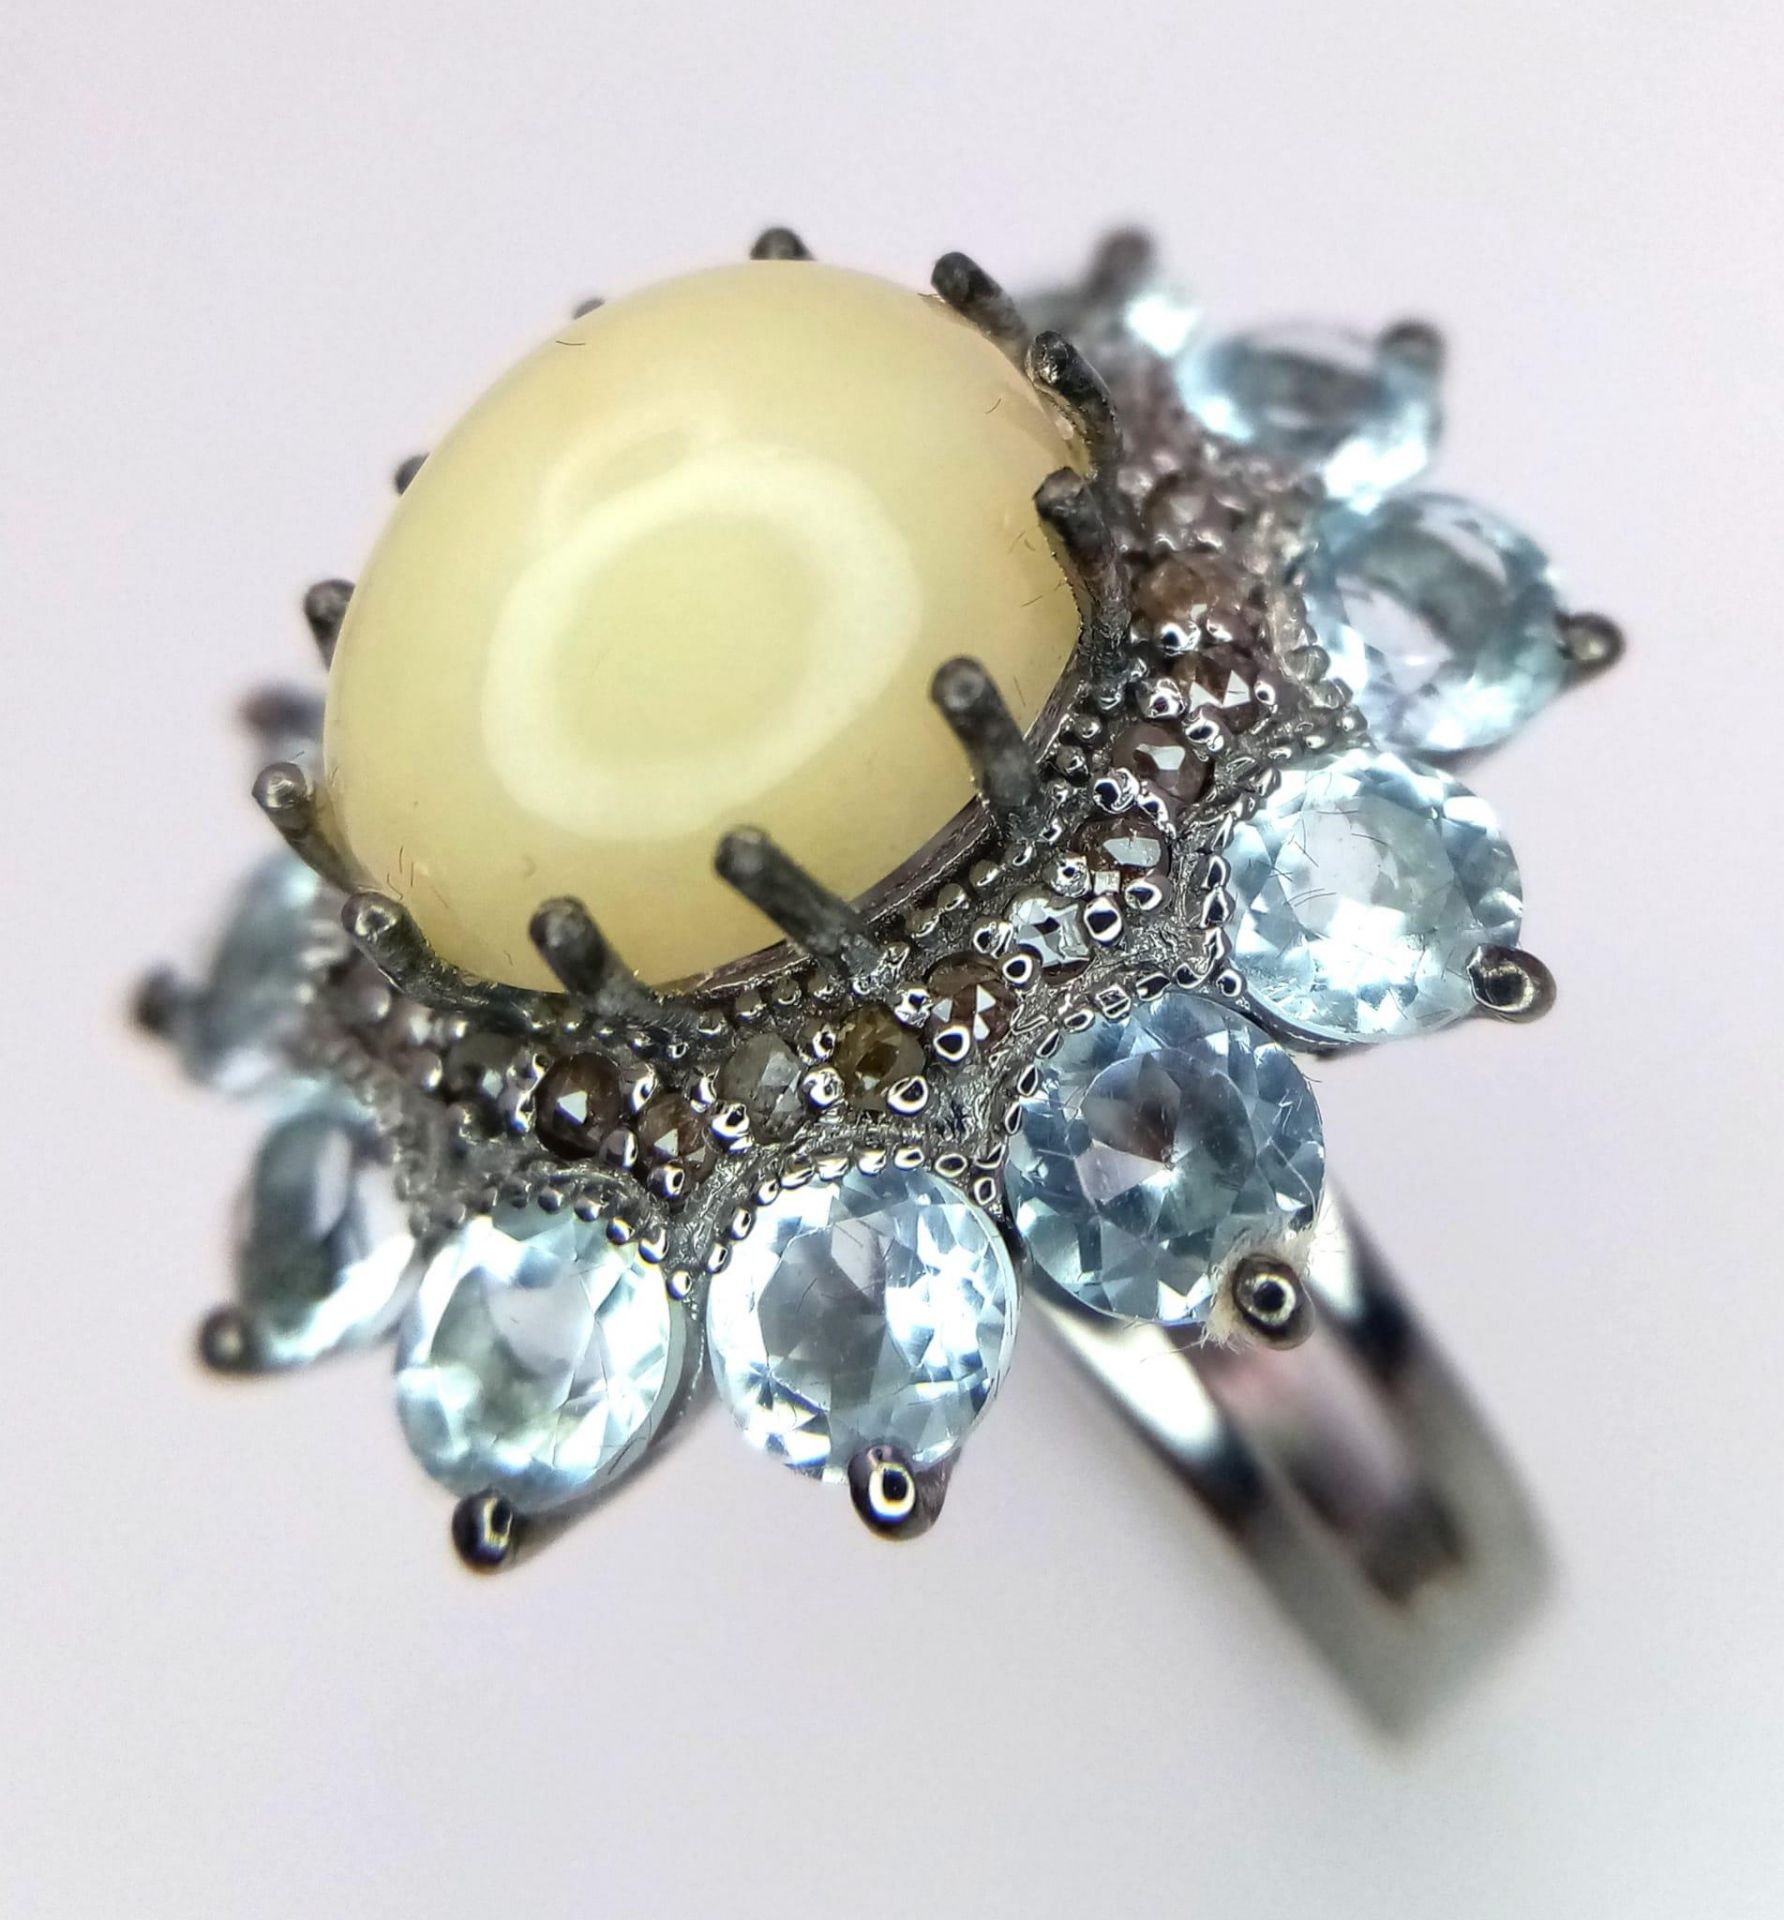 An Opal and Diamond Ring with Aquamarine Accents on 925 Silver. 2.88ct opal, 0.40ctw diamonds, 3. - Image 2 of 6